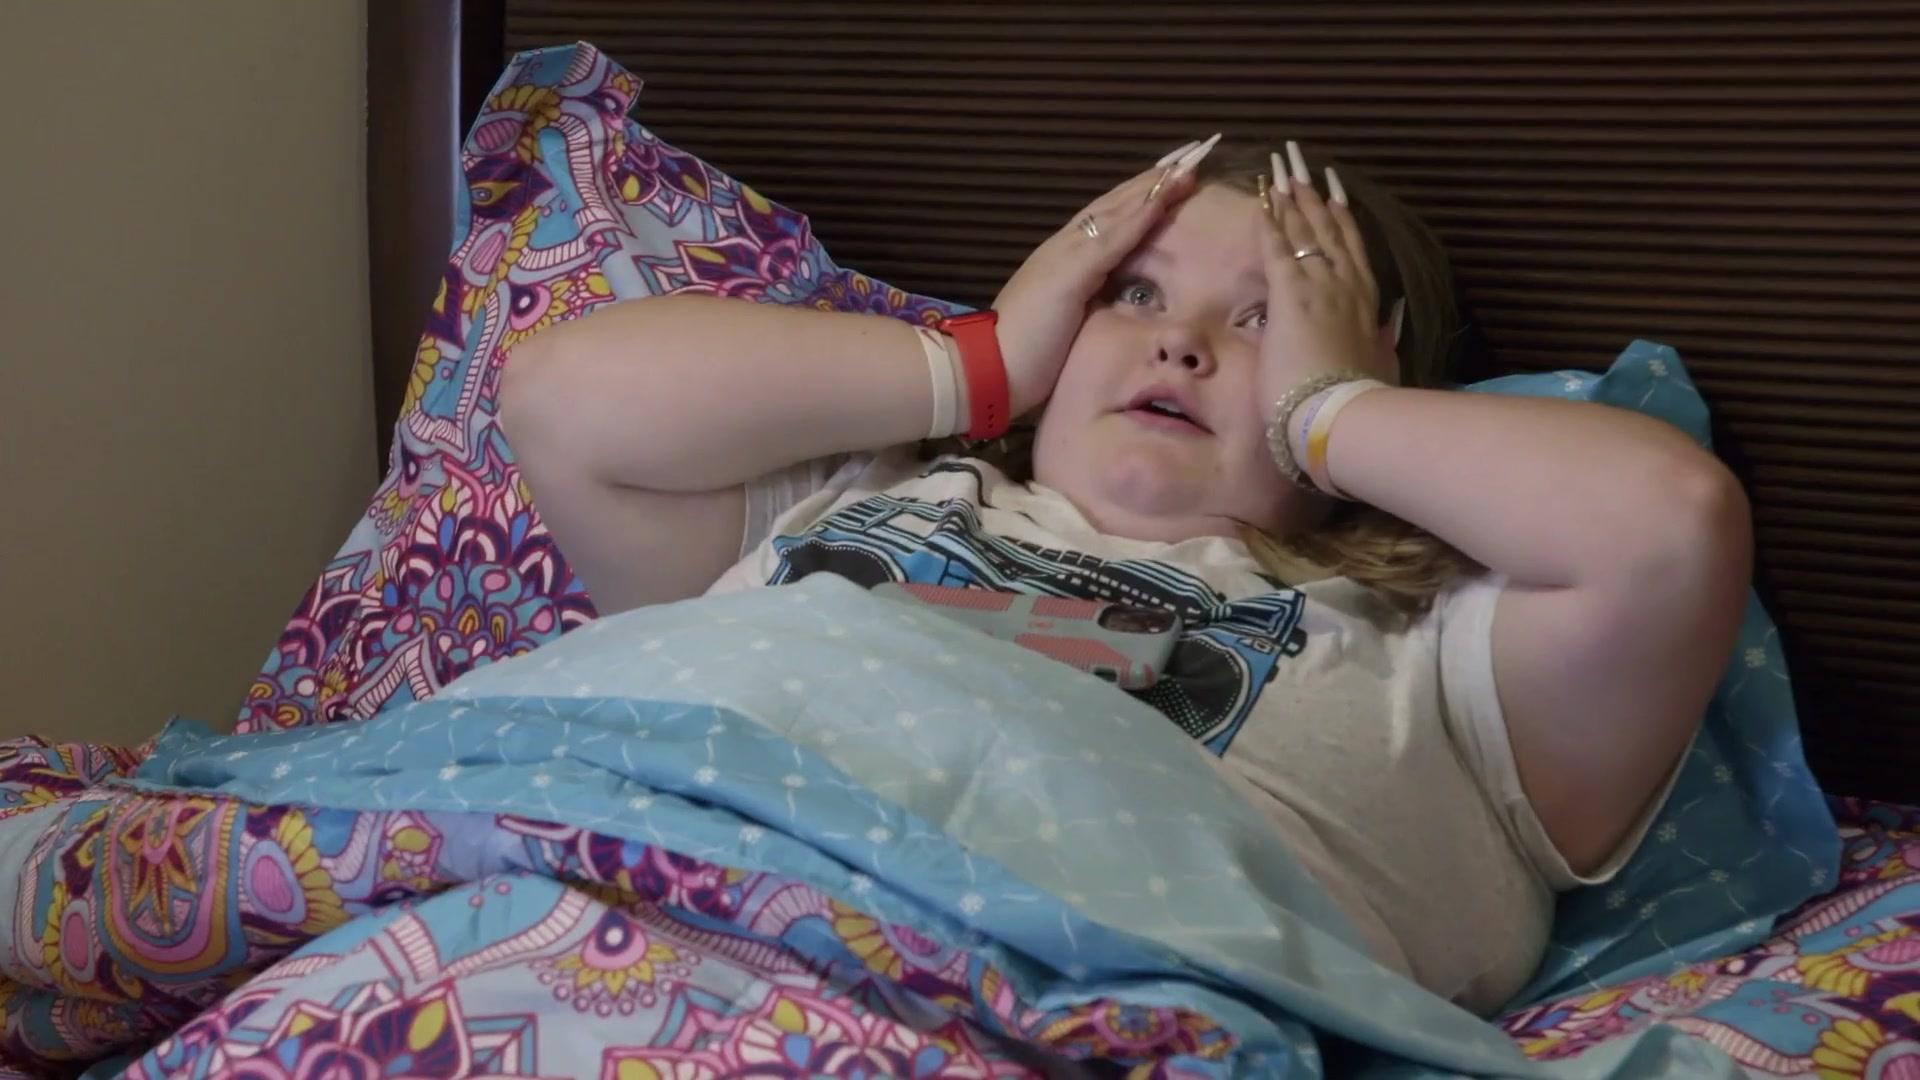 Watch June Has Left Her Family in Shambles | Mama June: From Not to Hot Video Extras